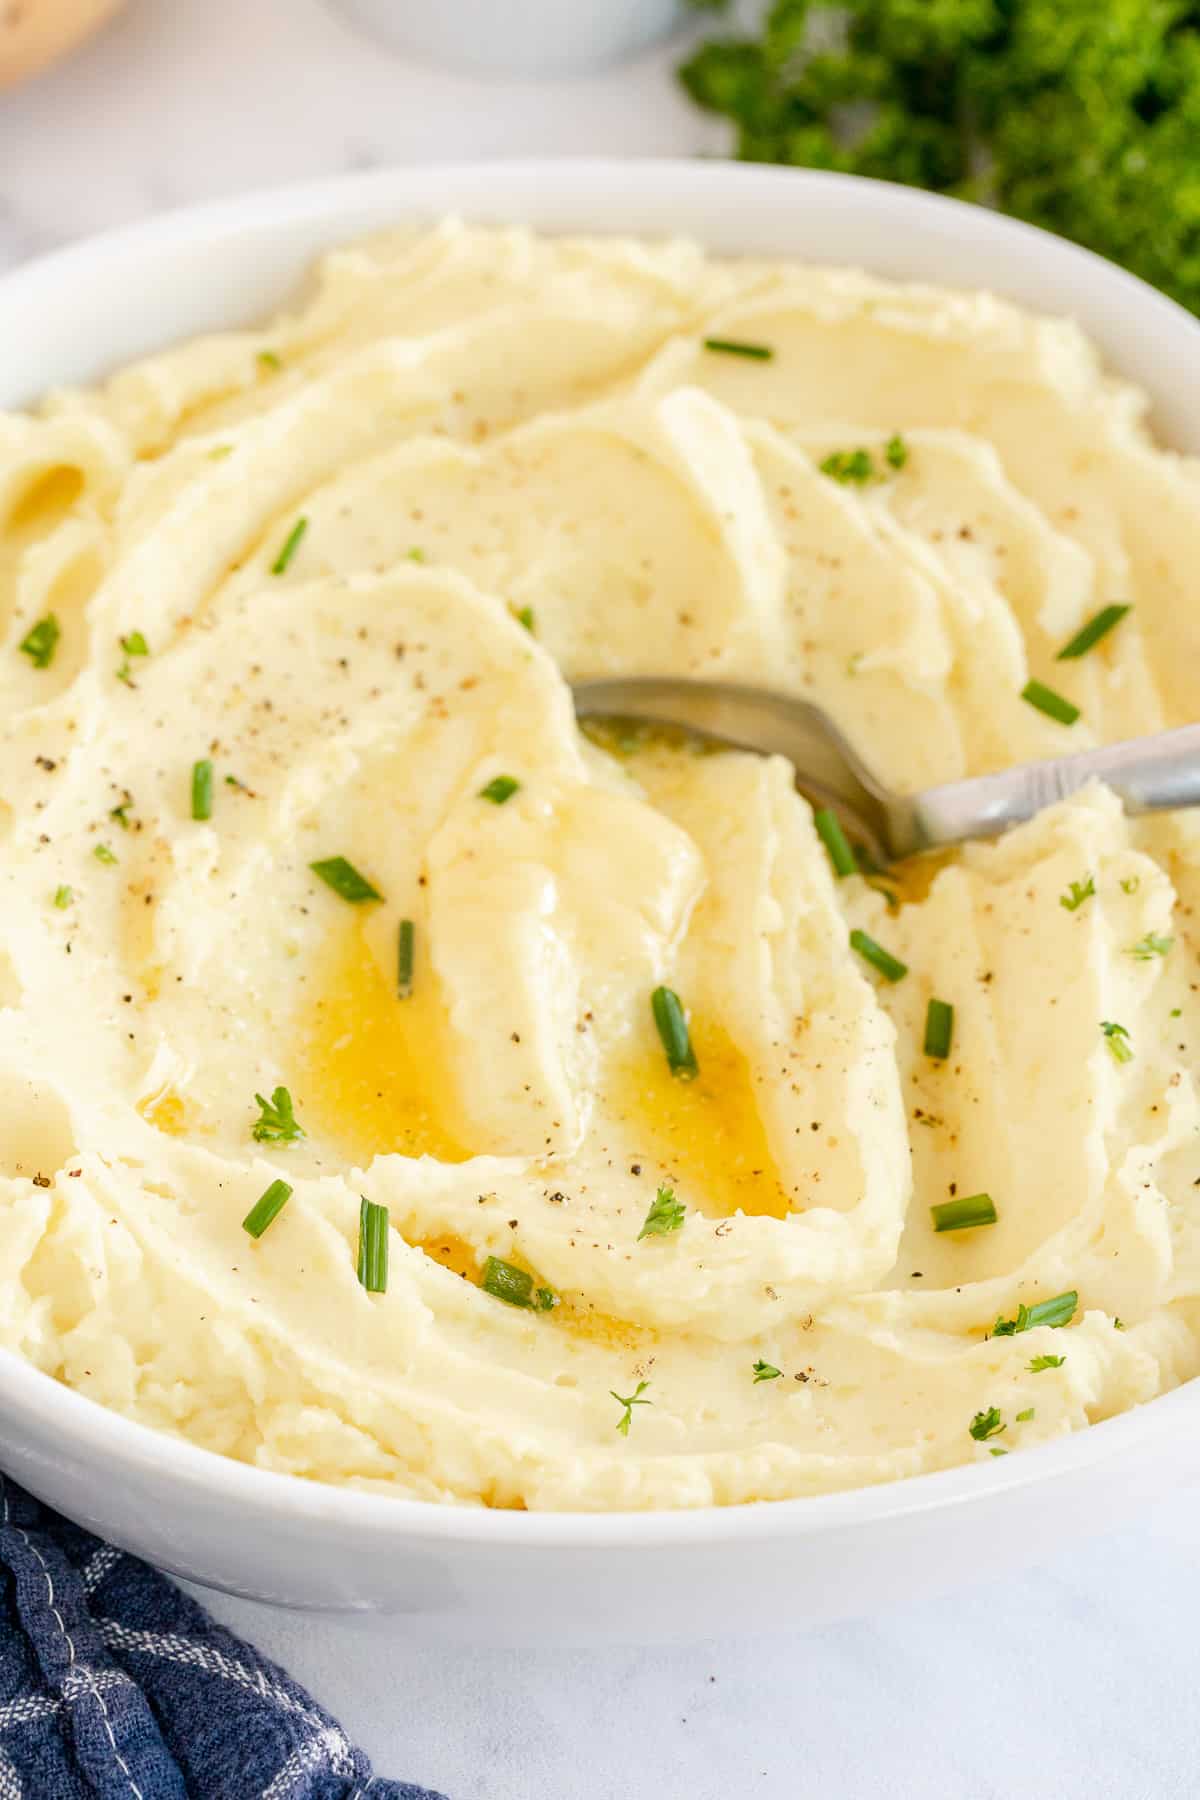 A white bowl filled with mashed potatoes topped with melted butter.